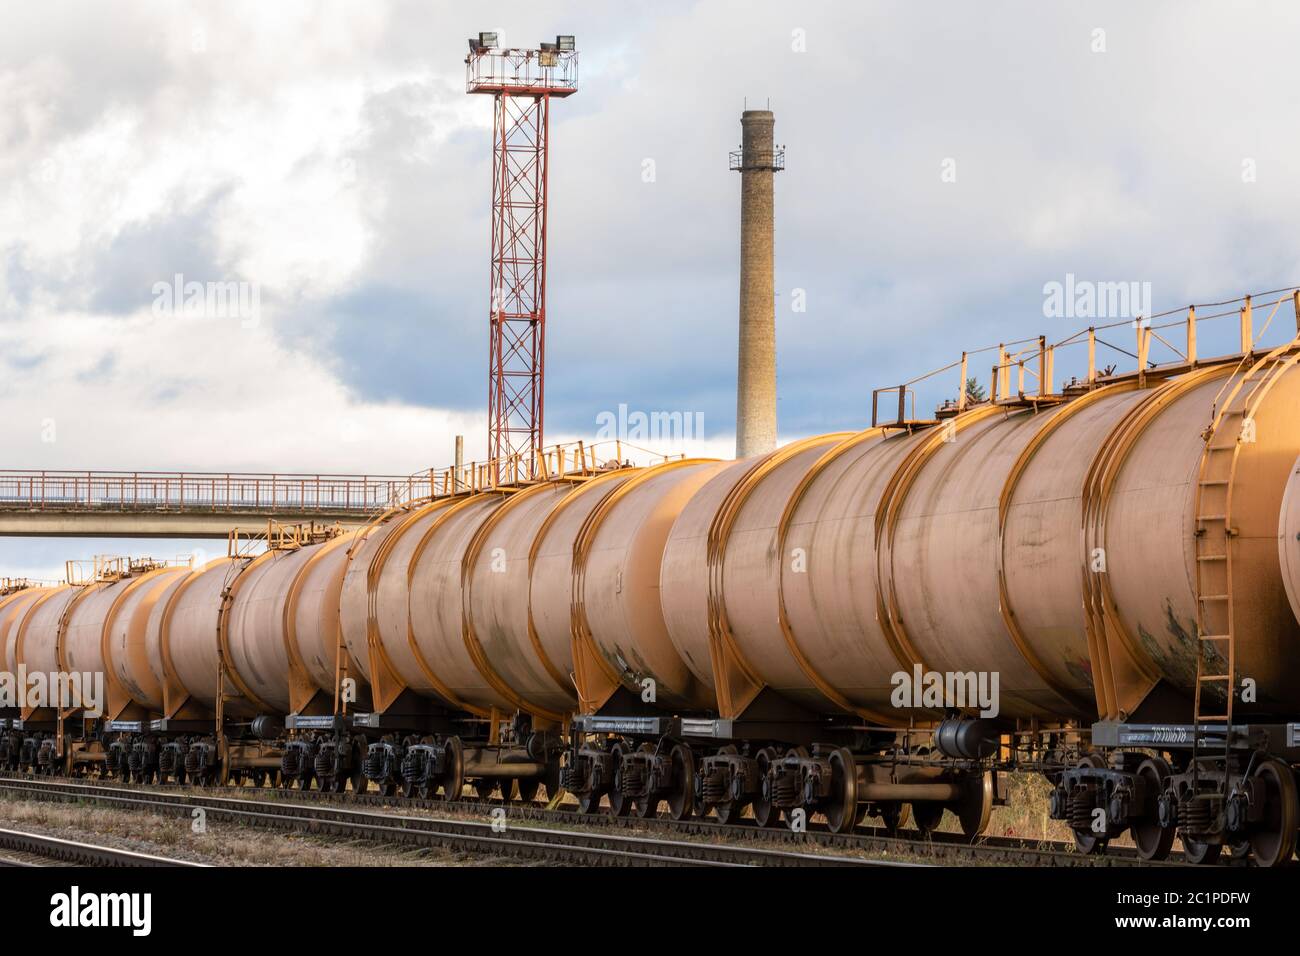 The train transports oil in tanks Stock Photo